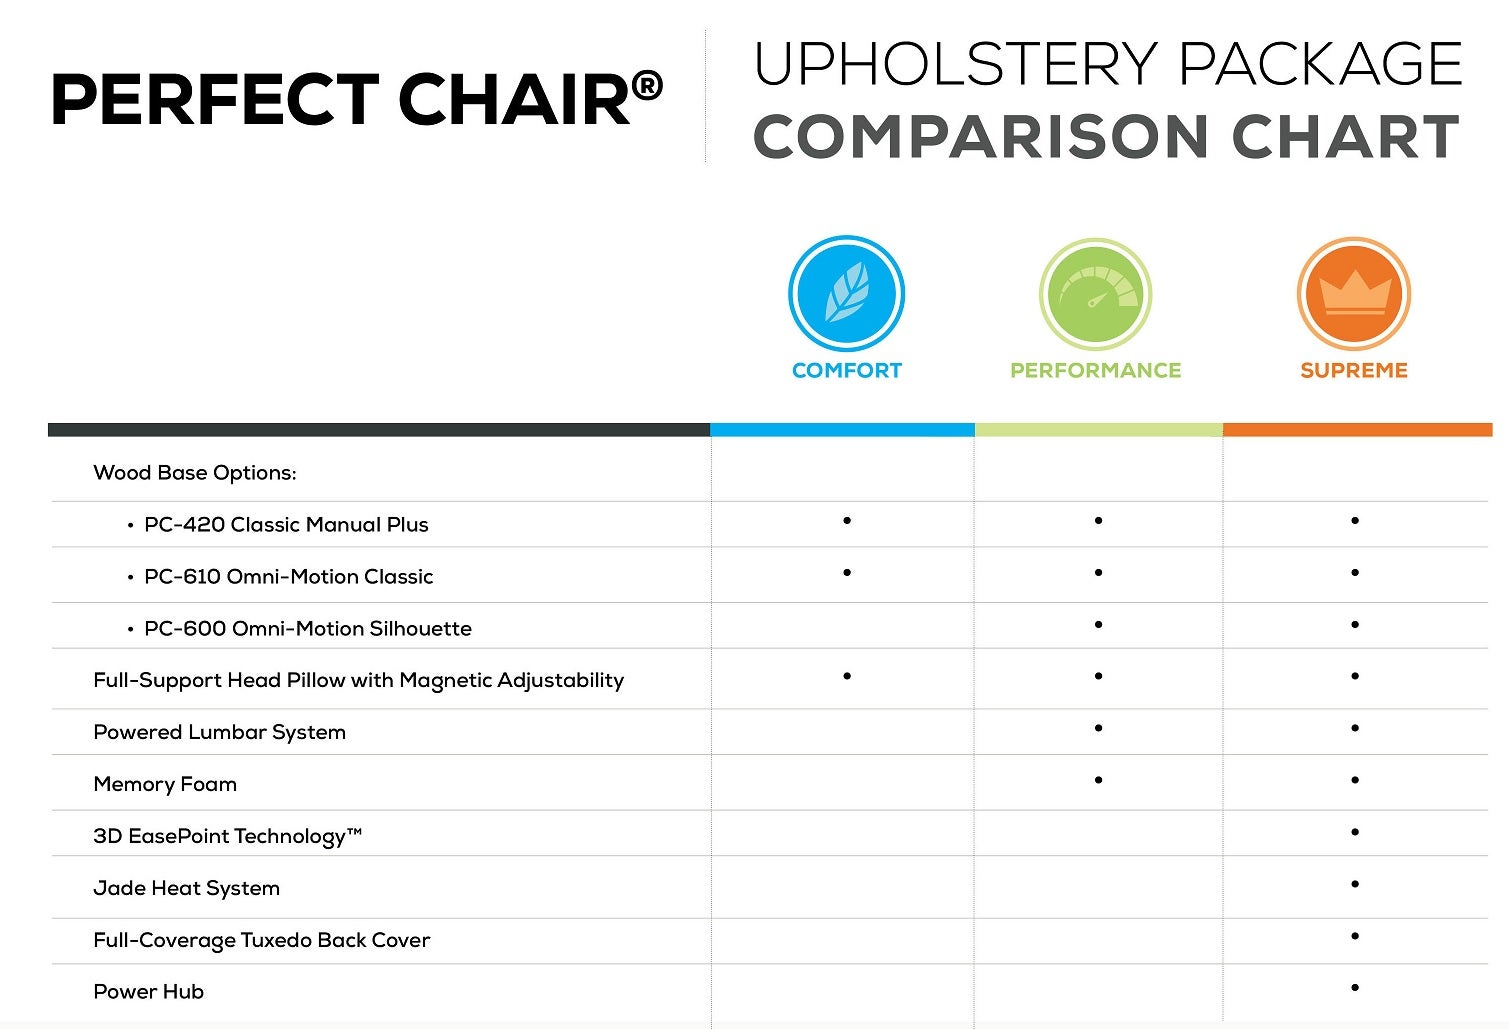 Human Touch Perfect Chair Upholstery Package Comparison Chart